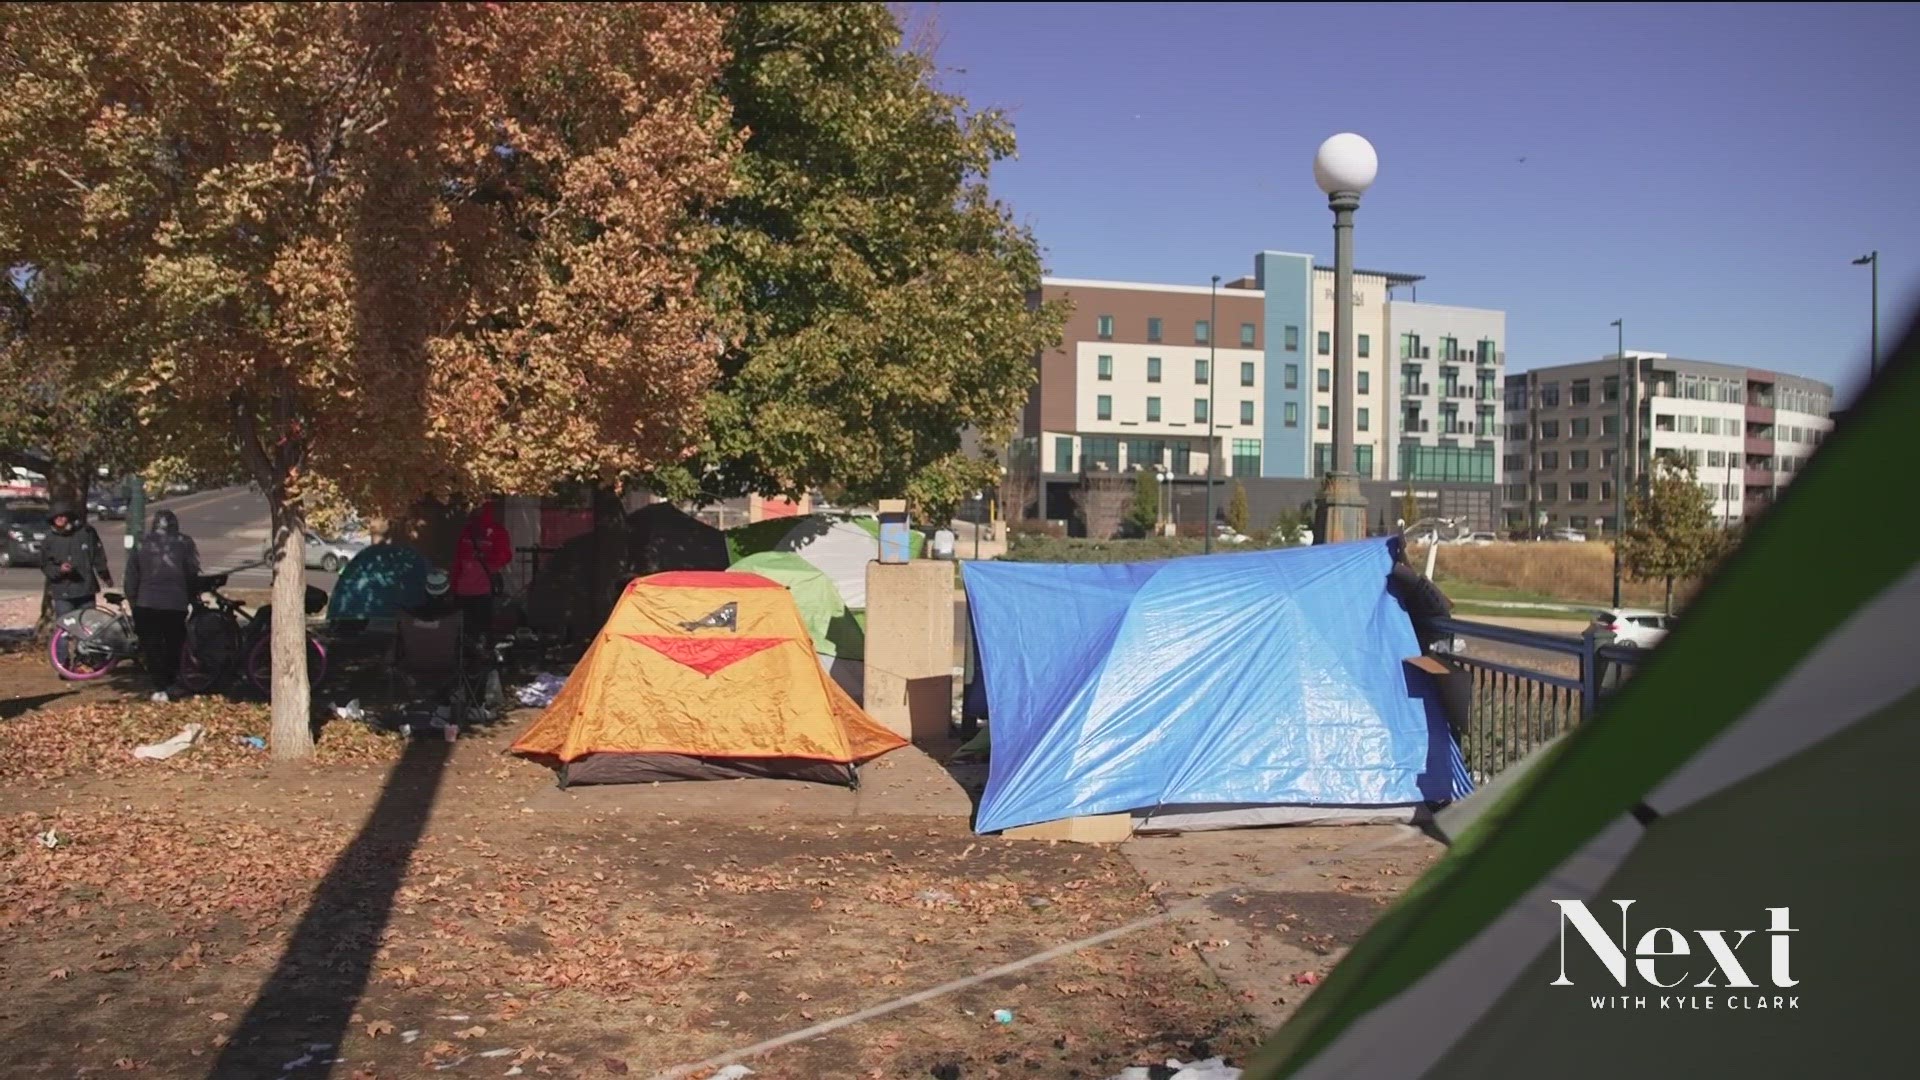 The encampment off Zuni Street in Denver has grown to 15 tents on land under Denver Parks and Recreation. Advocates worry people will get swept up.